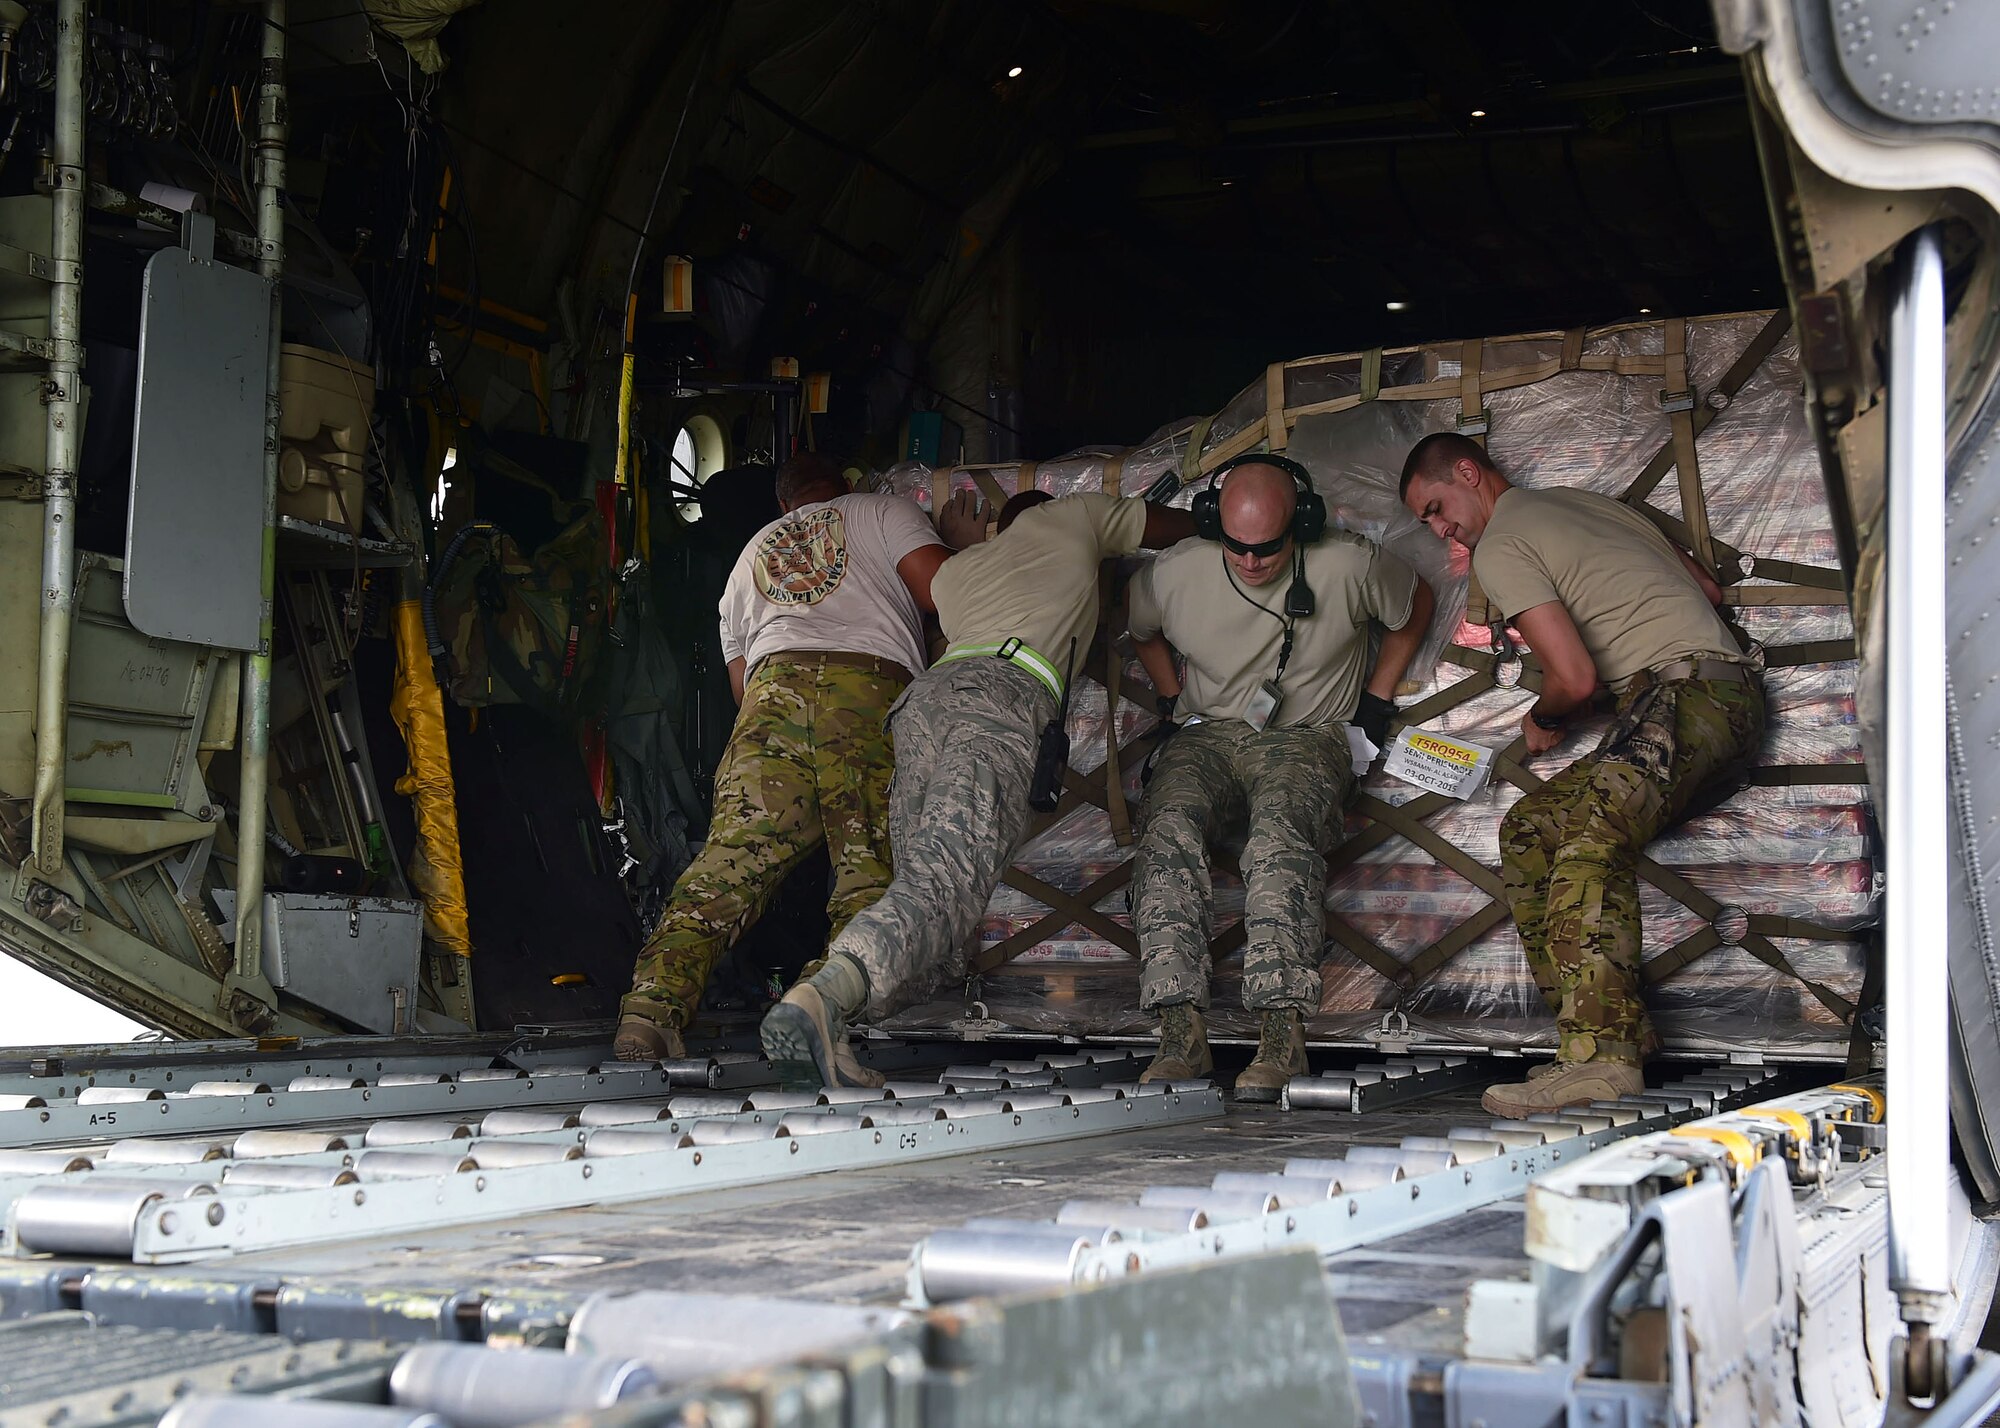 Members of the 386th Expeditionary Logistics Readiness Squadron and the 737th Expeditionary Airlift Squadron load a cargo pallet onboard a C-130H Hercules at an undisclosed location in Southwest Asia, Oct. 29, 2015. The two squadrons work together to ensure cargo is delivered safely to the correct locations throughout the area of responsibility. (U.S. Air Force photo by Staff Sgt. Jerilyn Quintanilla)